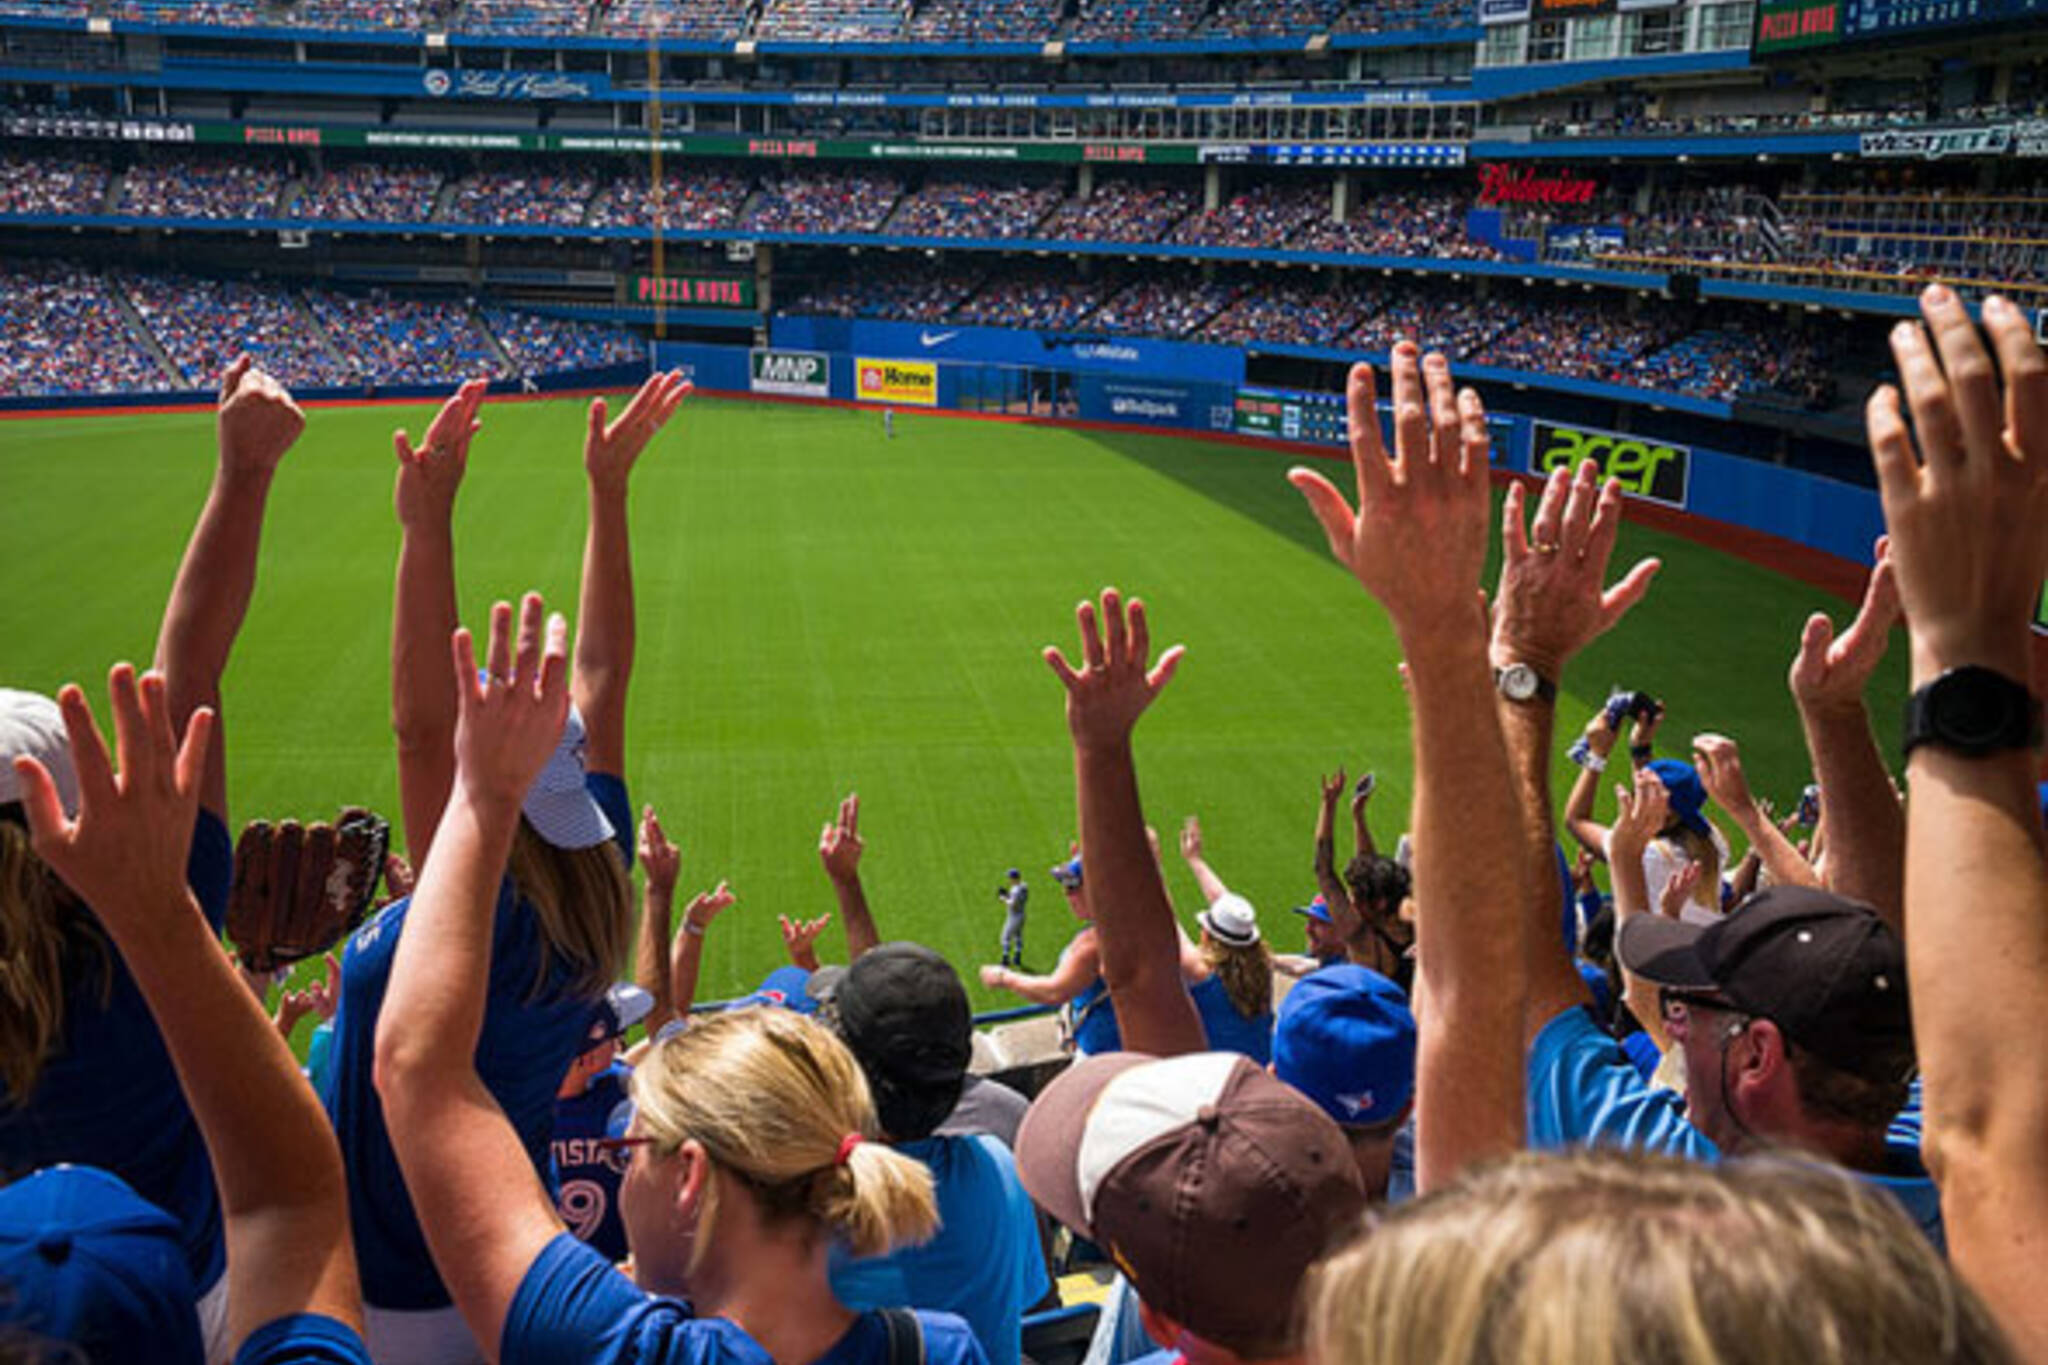 Toronto Blue Jays Now The Leagues Best Odds To Win 2015